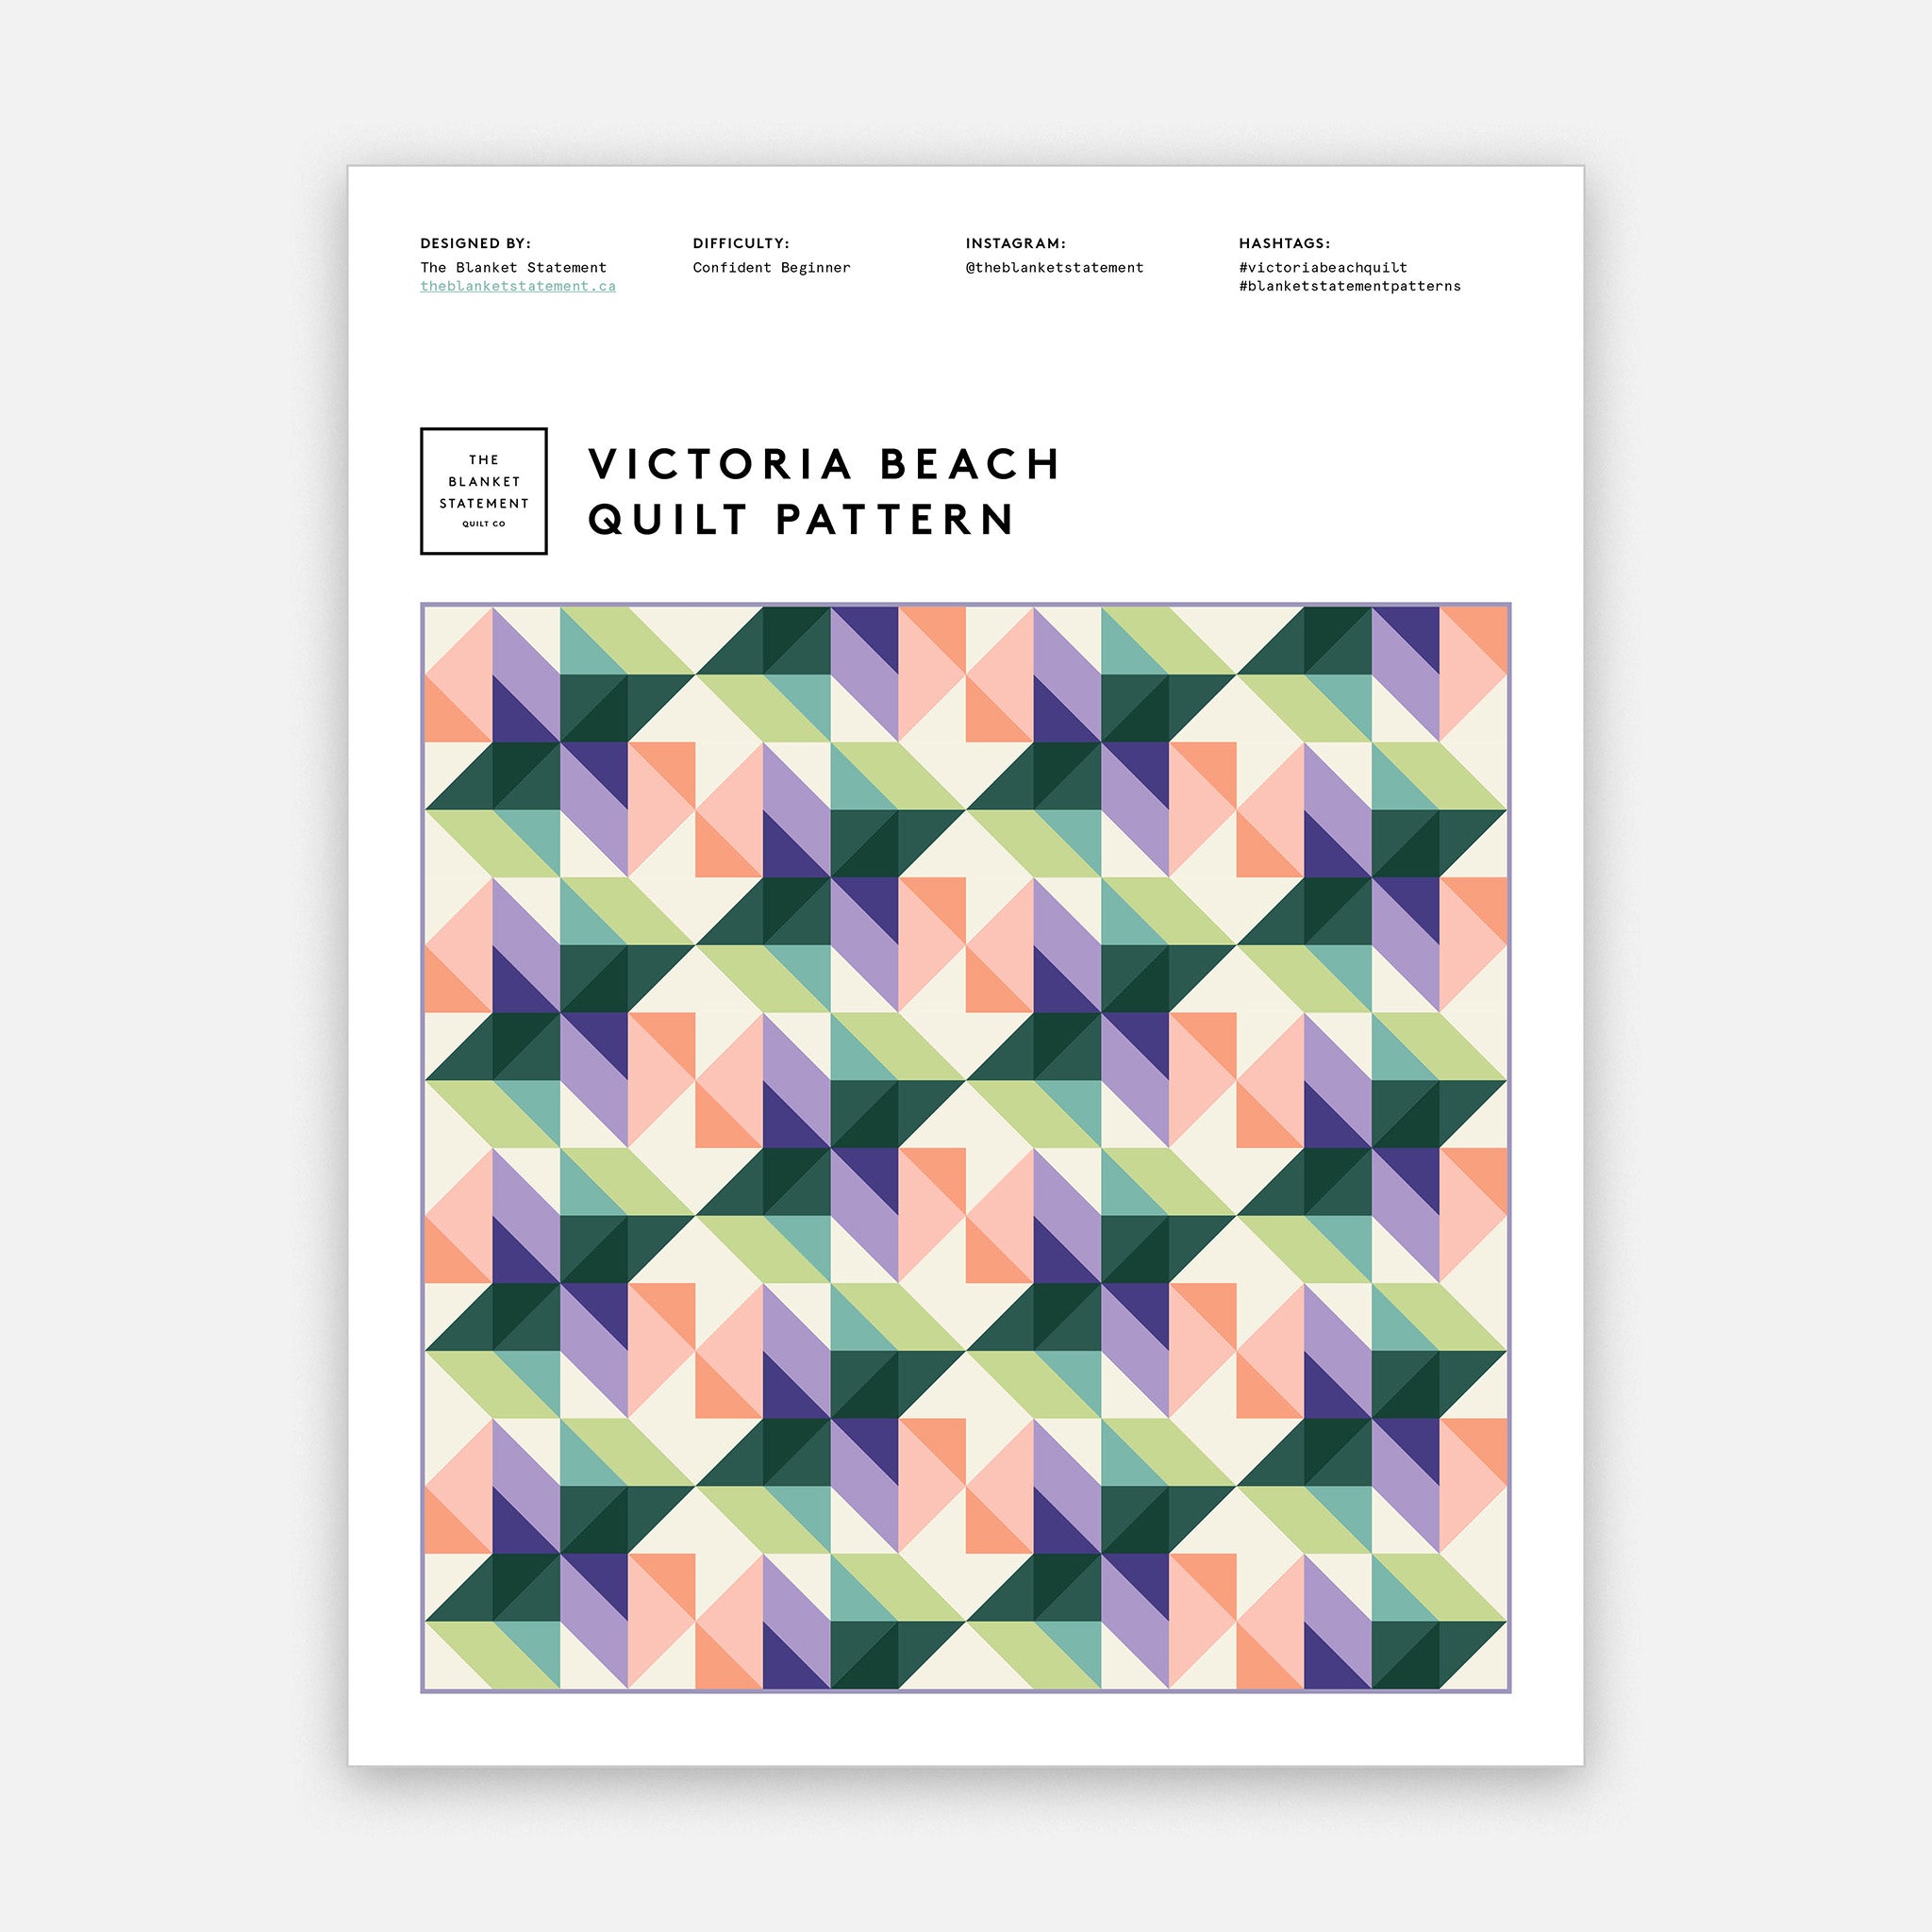 Introducing: The Victoria Beach Quilt – The Blanket Statement